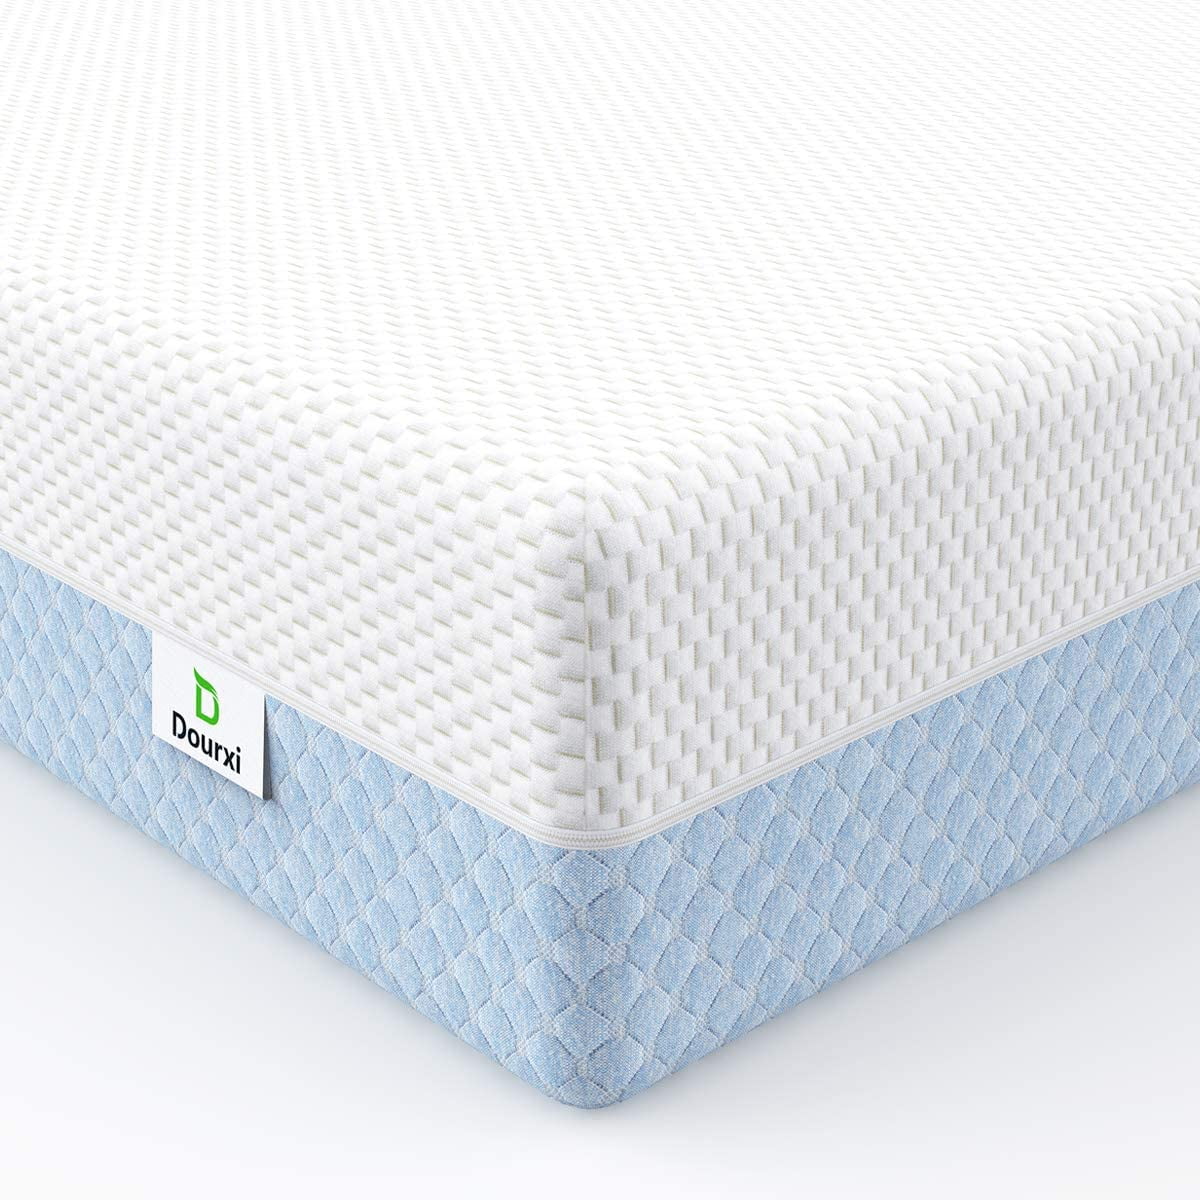 Cot Bed Breathable Foam Mattress toddler kids washable in All Sizes 